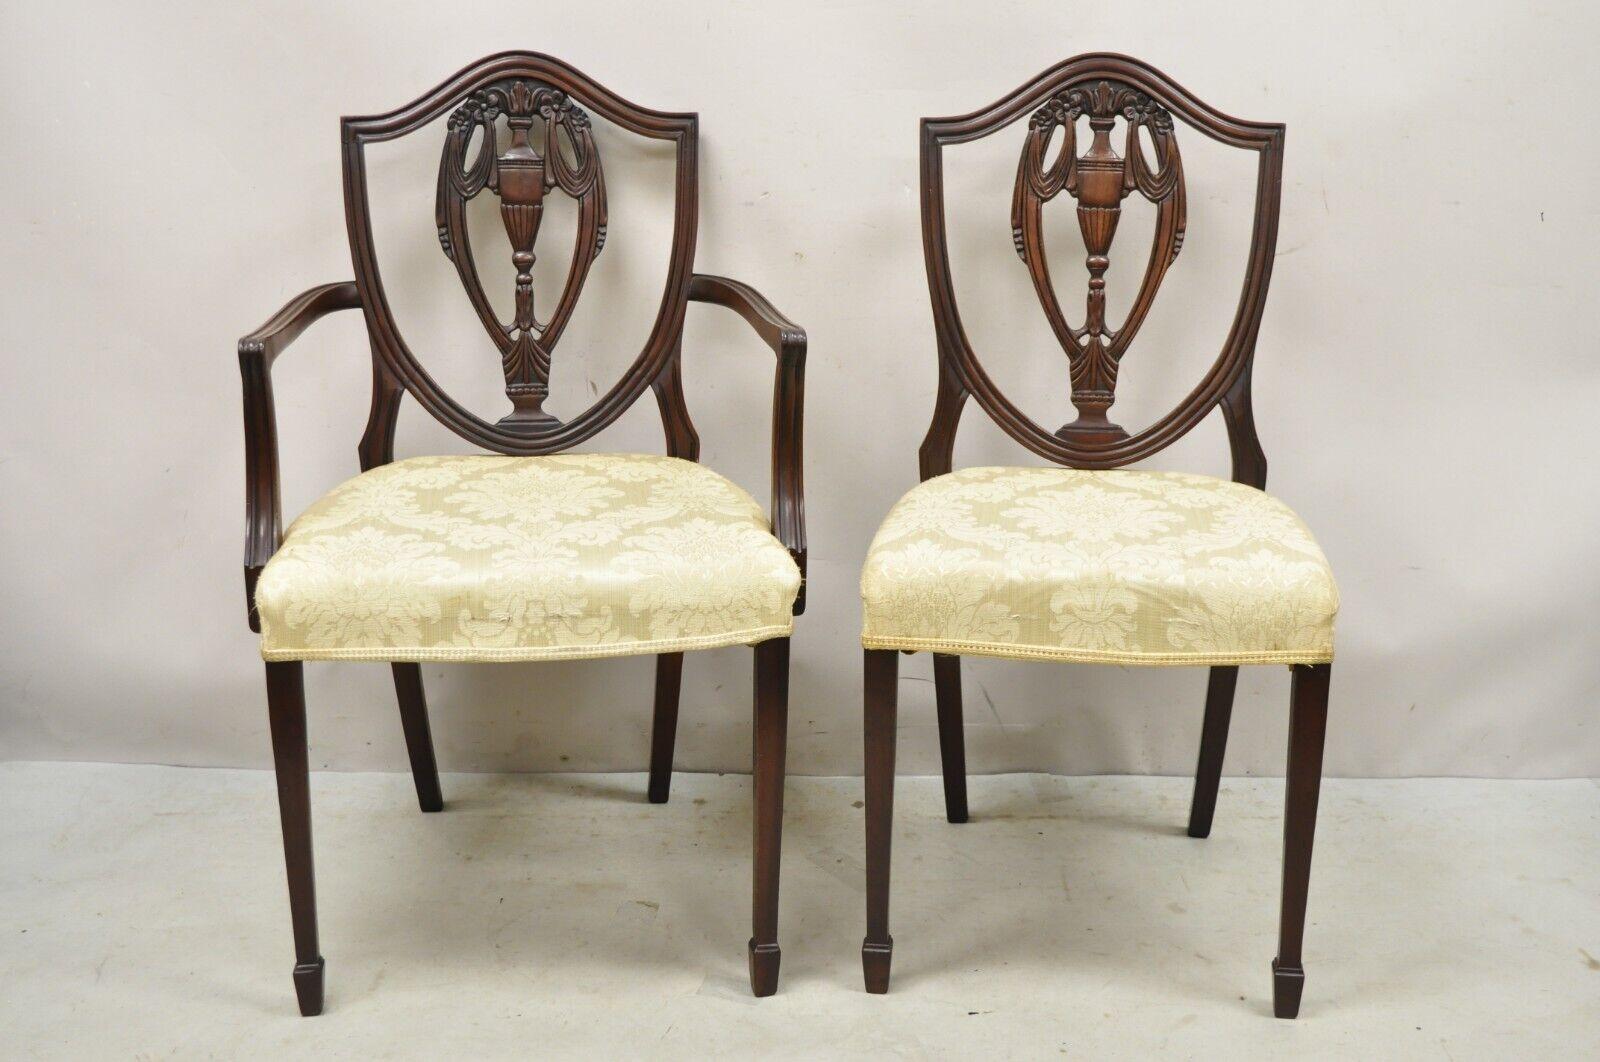 Vintage Mahogany Shield Back Hepplewhite Style Duncan Phyfe Dining Chairs - Set of 10. Item features a very rare set of 10 chairs, (2) armchairs, (8) side chairs, urn and drape carved backrests, shapely shield backs, very nice vintage set, great